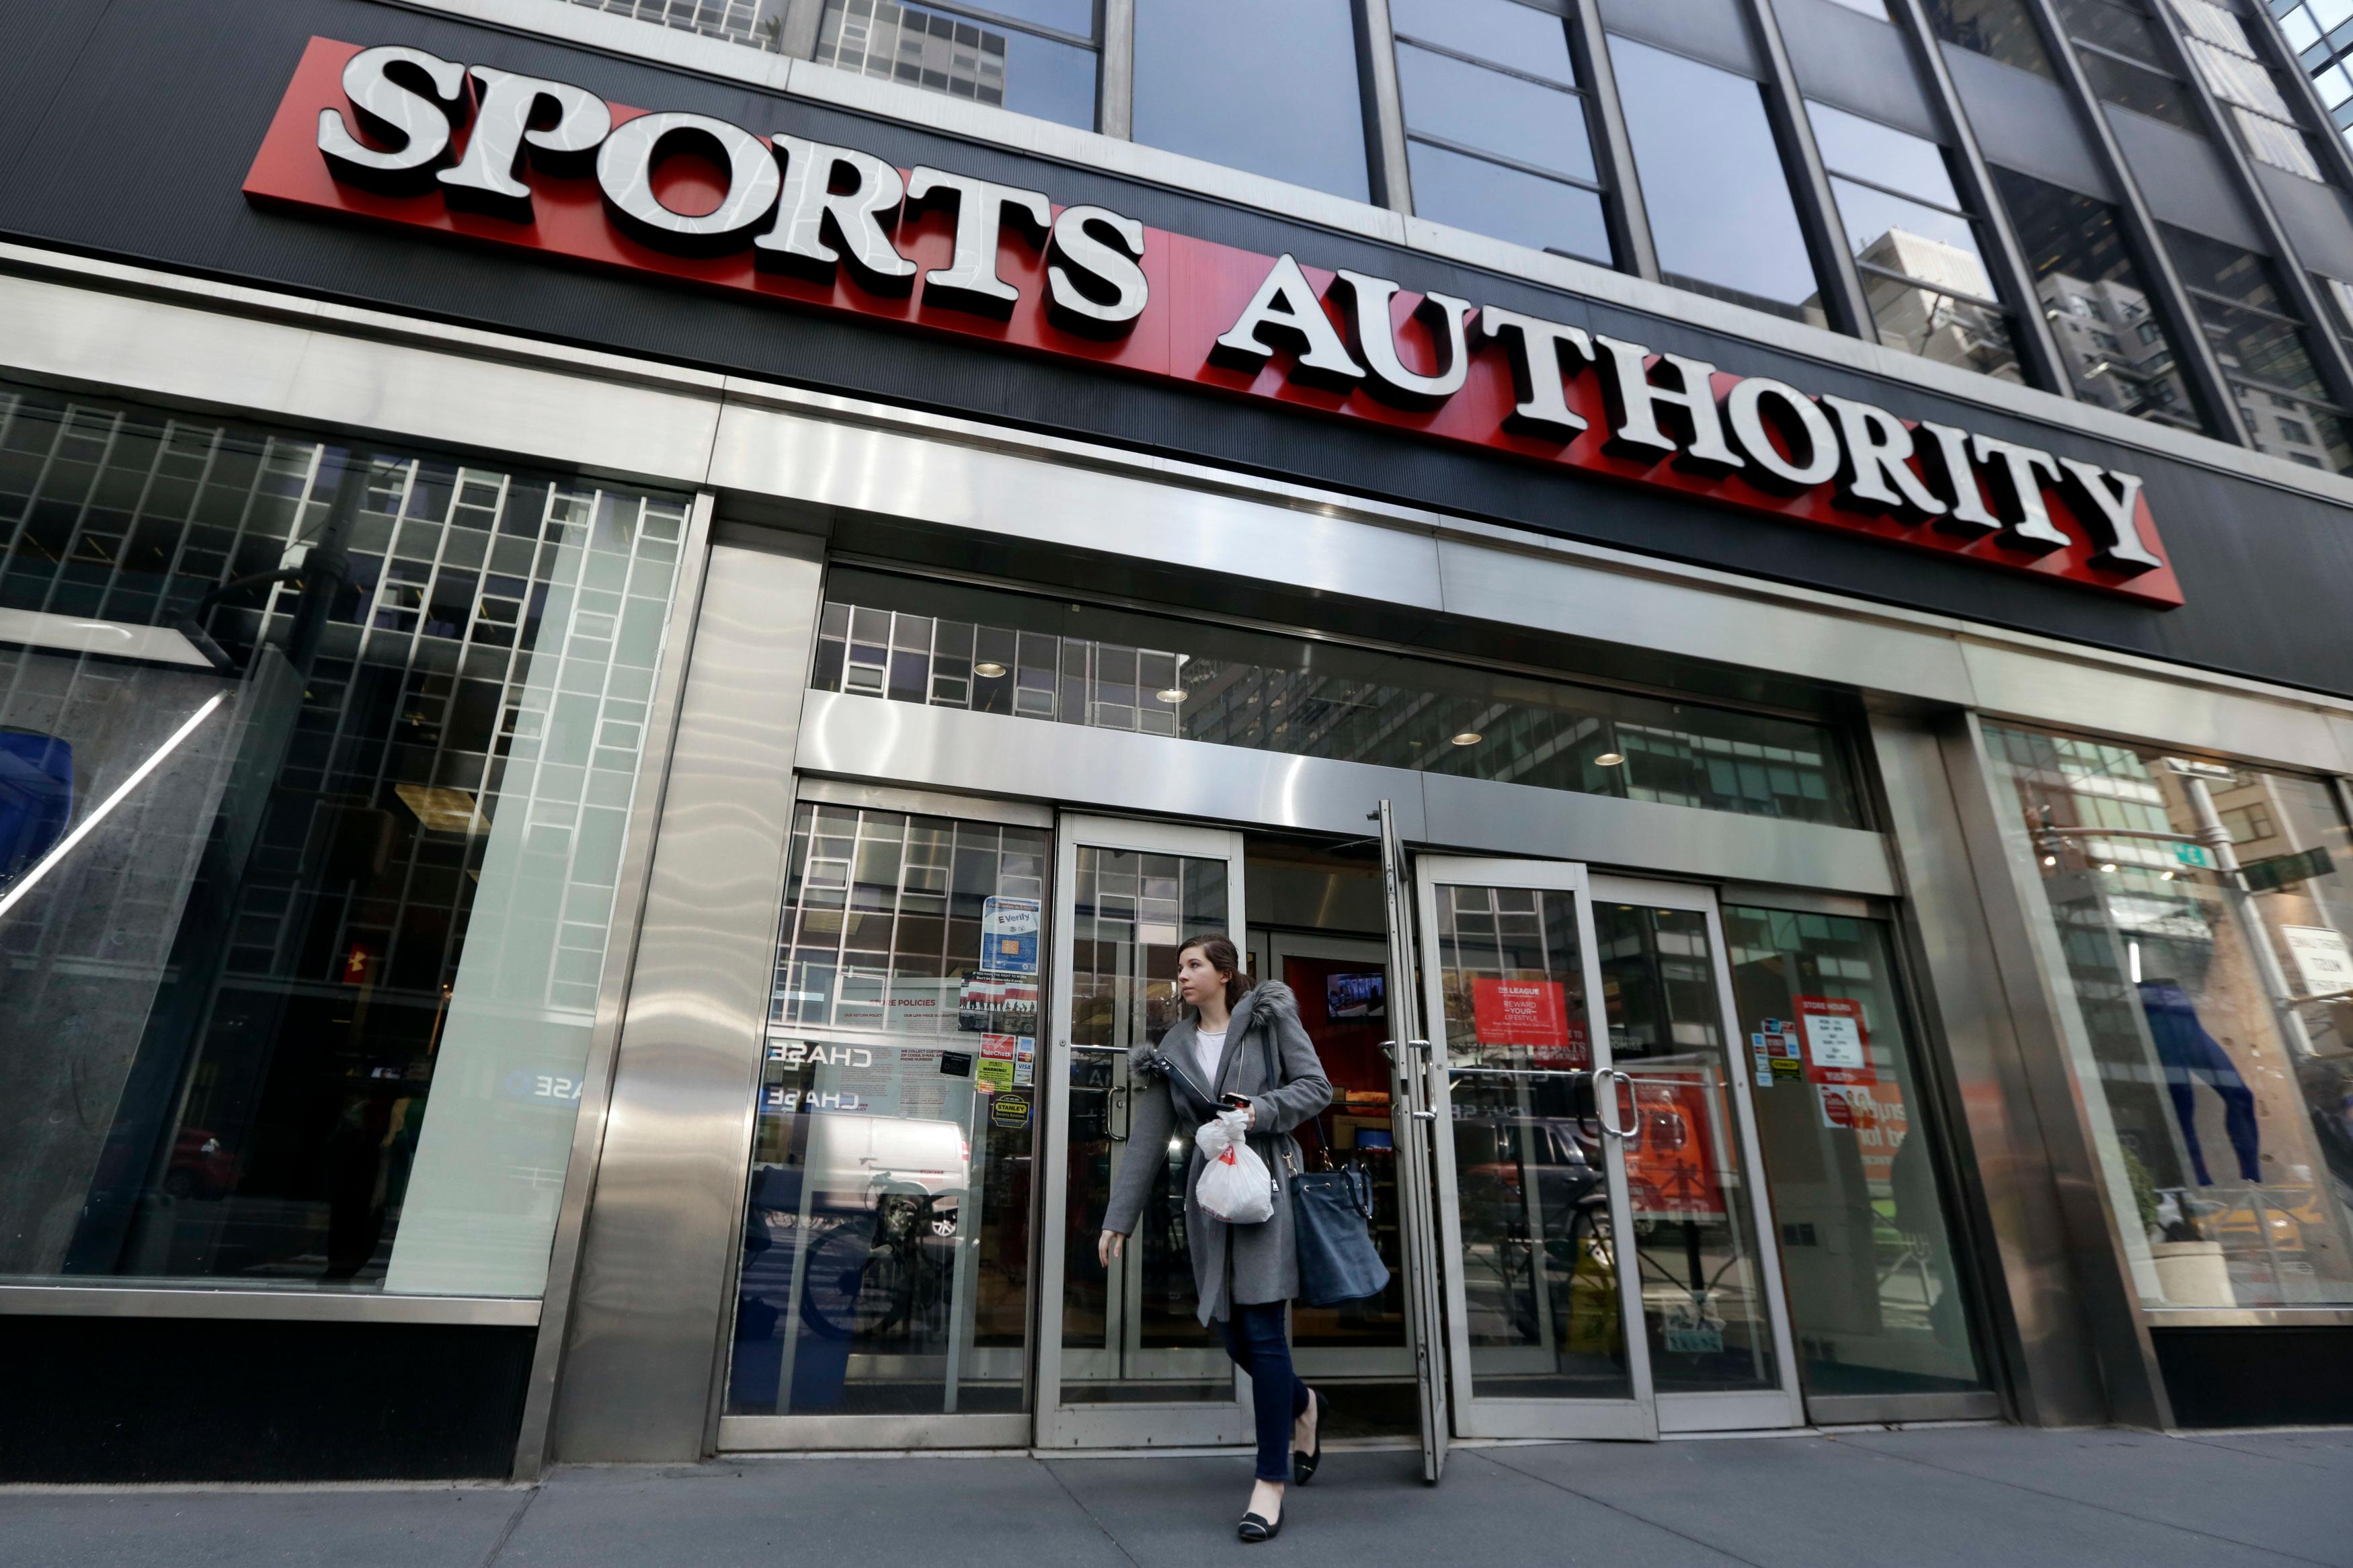 Photo: Sports Authority store in New York (AP Photo)